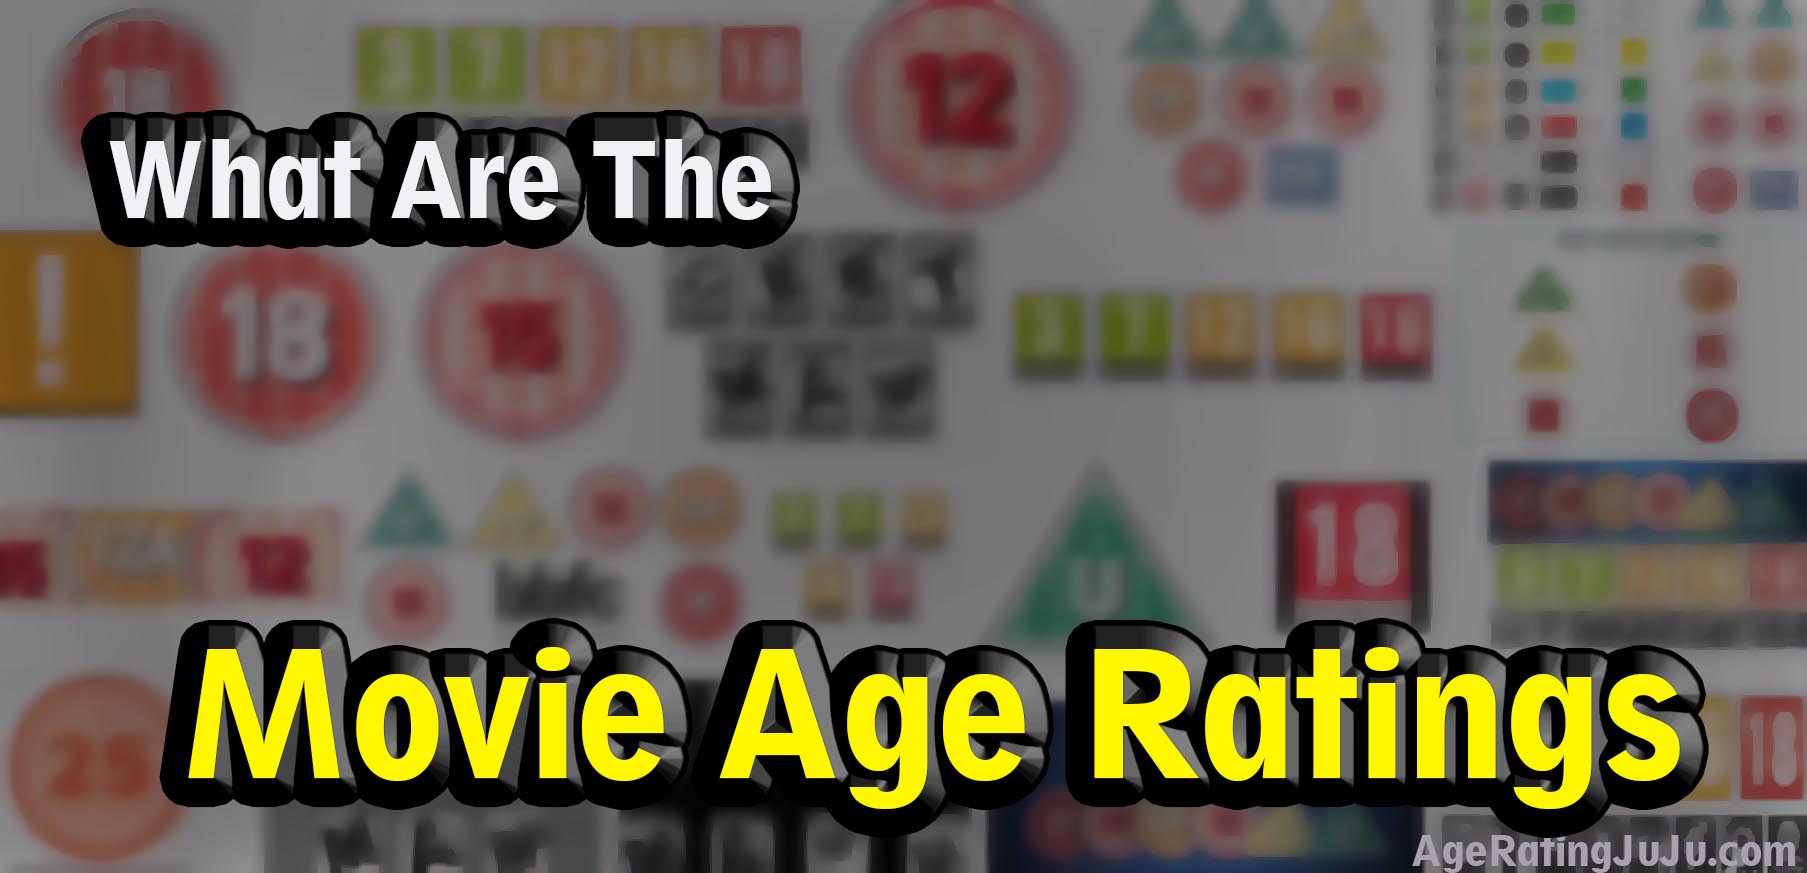 What Are The Movie Age Ratings - Types and Who created and why